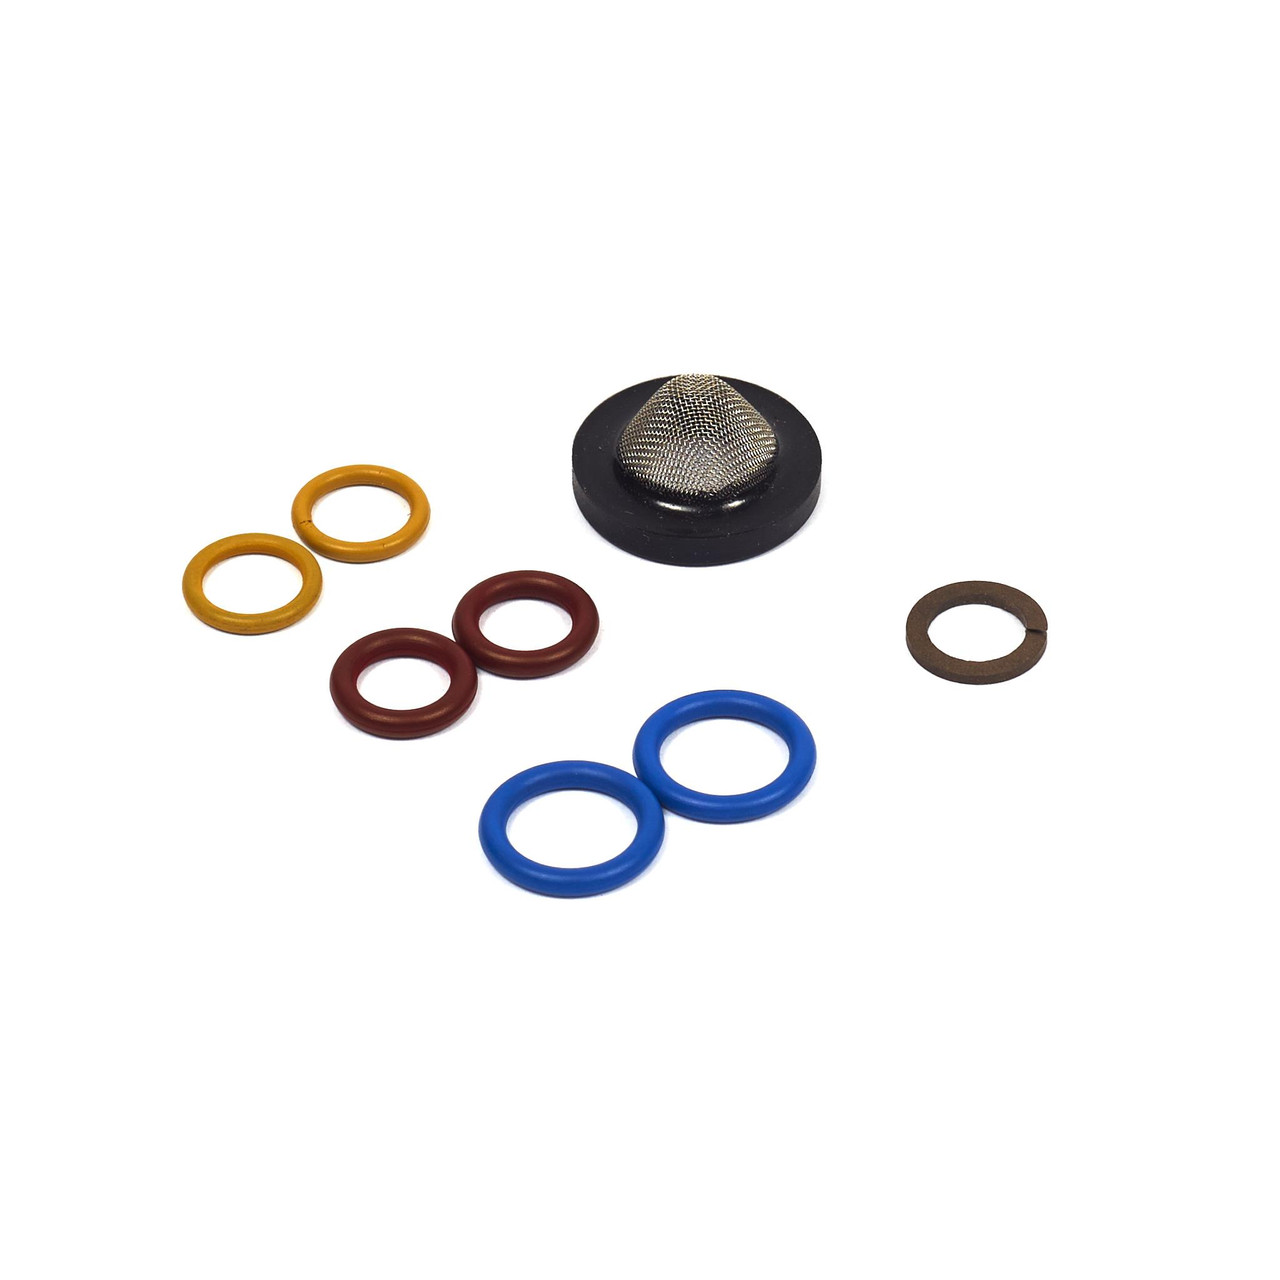 Briggs and Stratton 705001 Pressure Washer O-Ring Kit